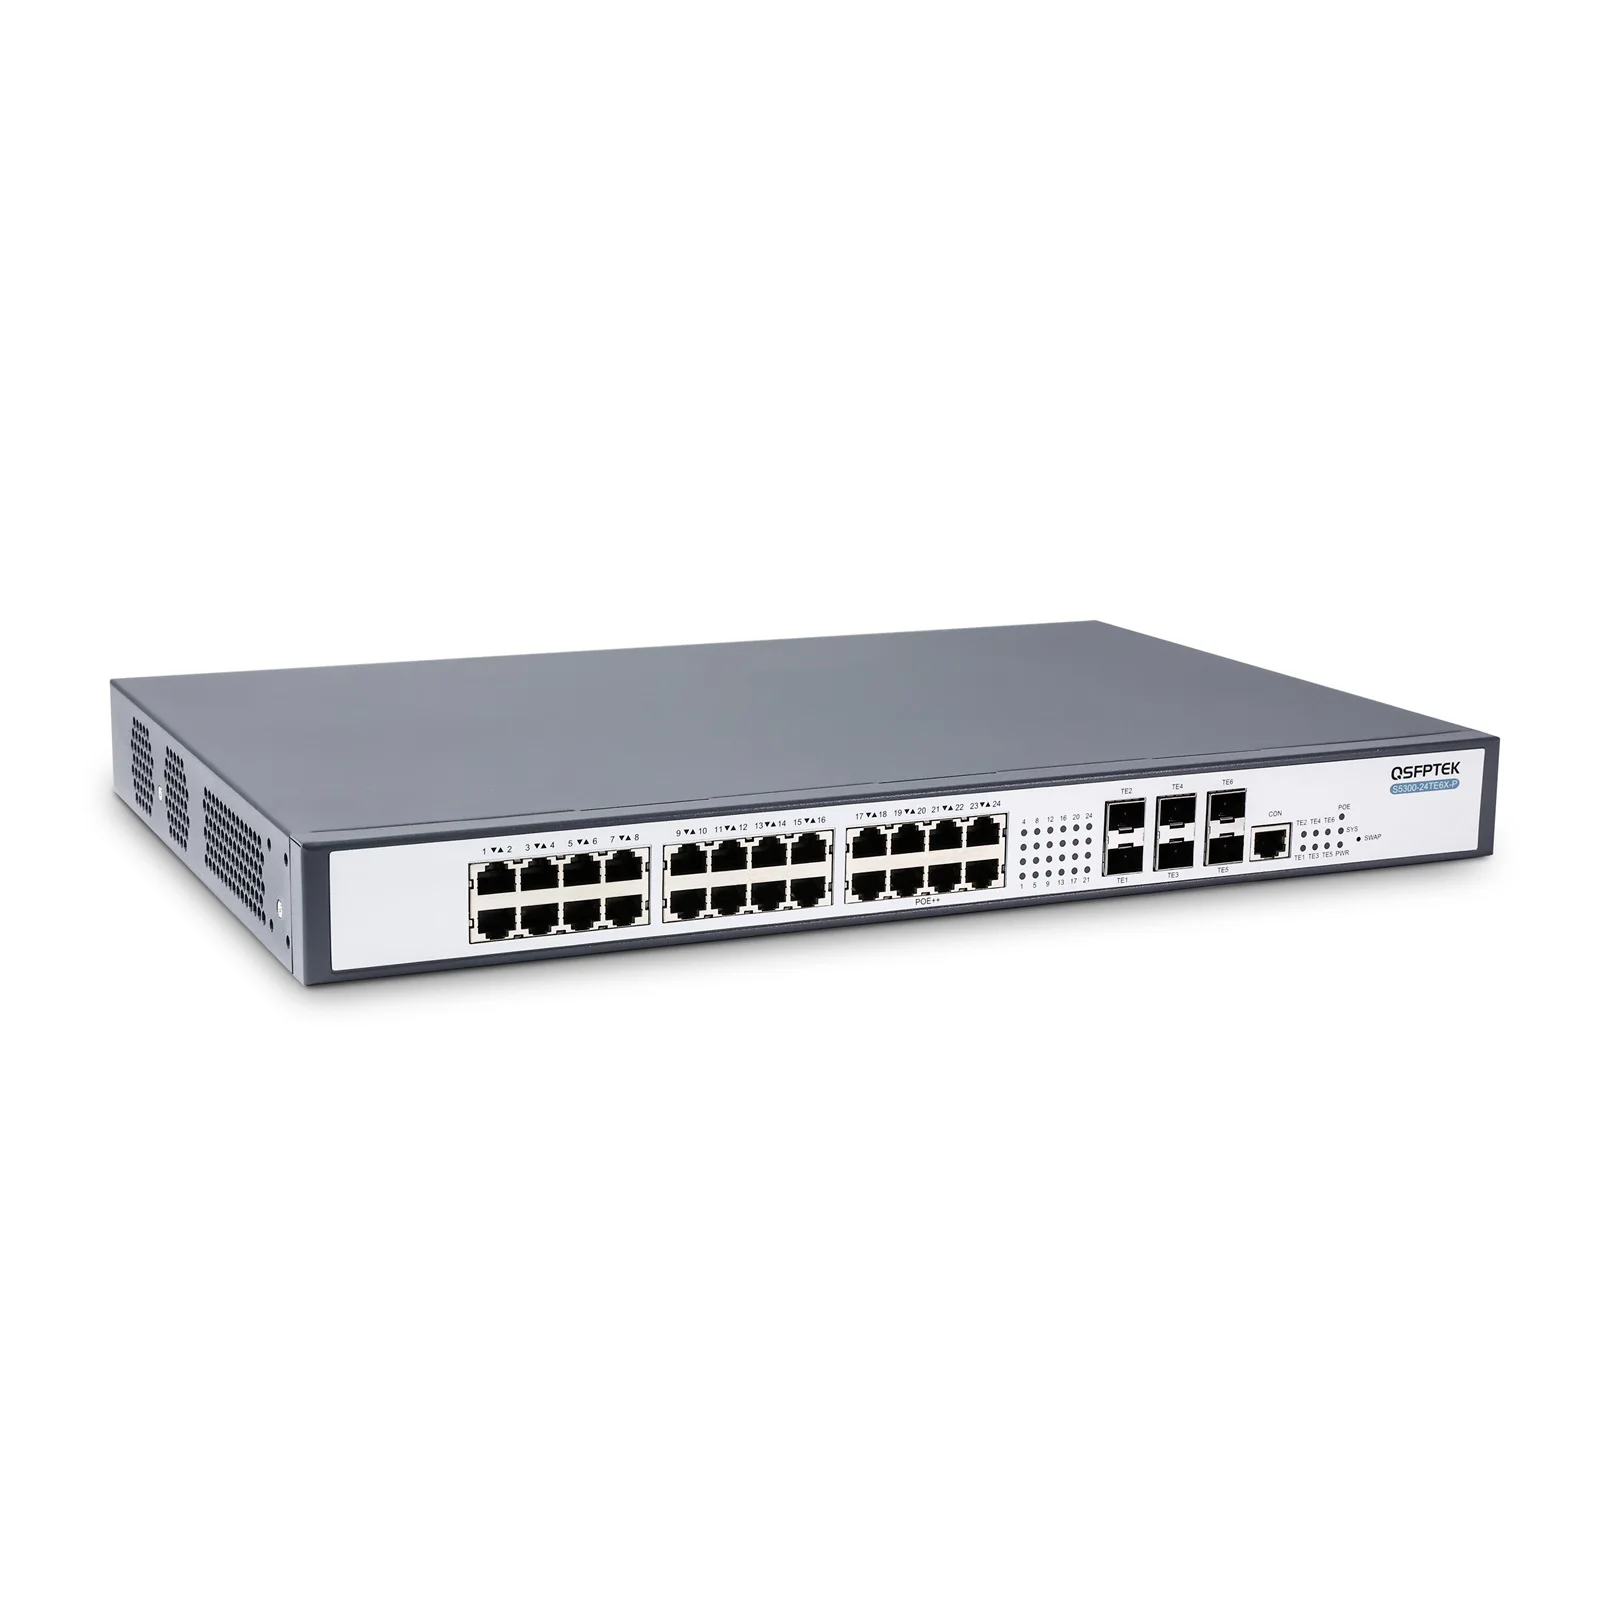 Get reliable 10G Ethernet Switches from US stock with fast shipping